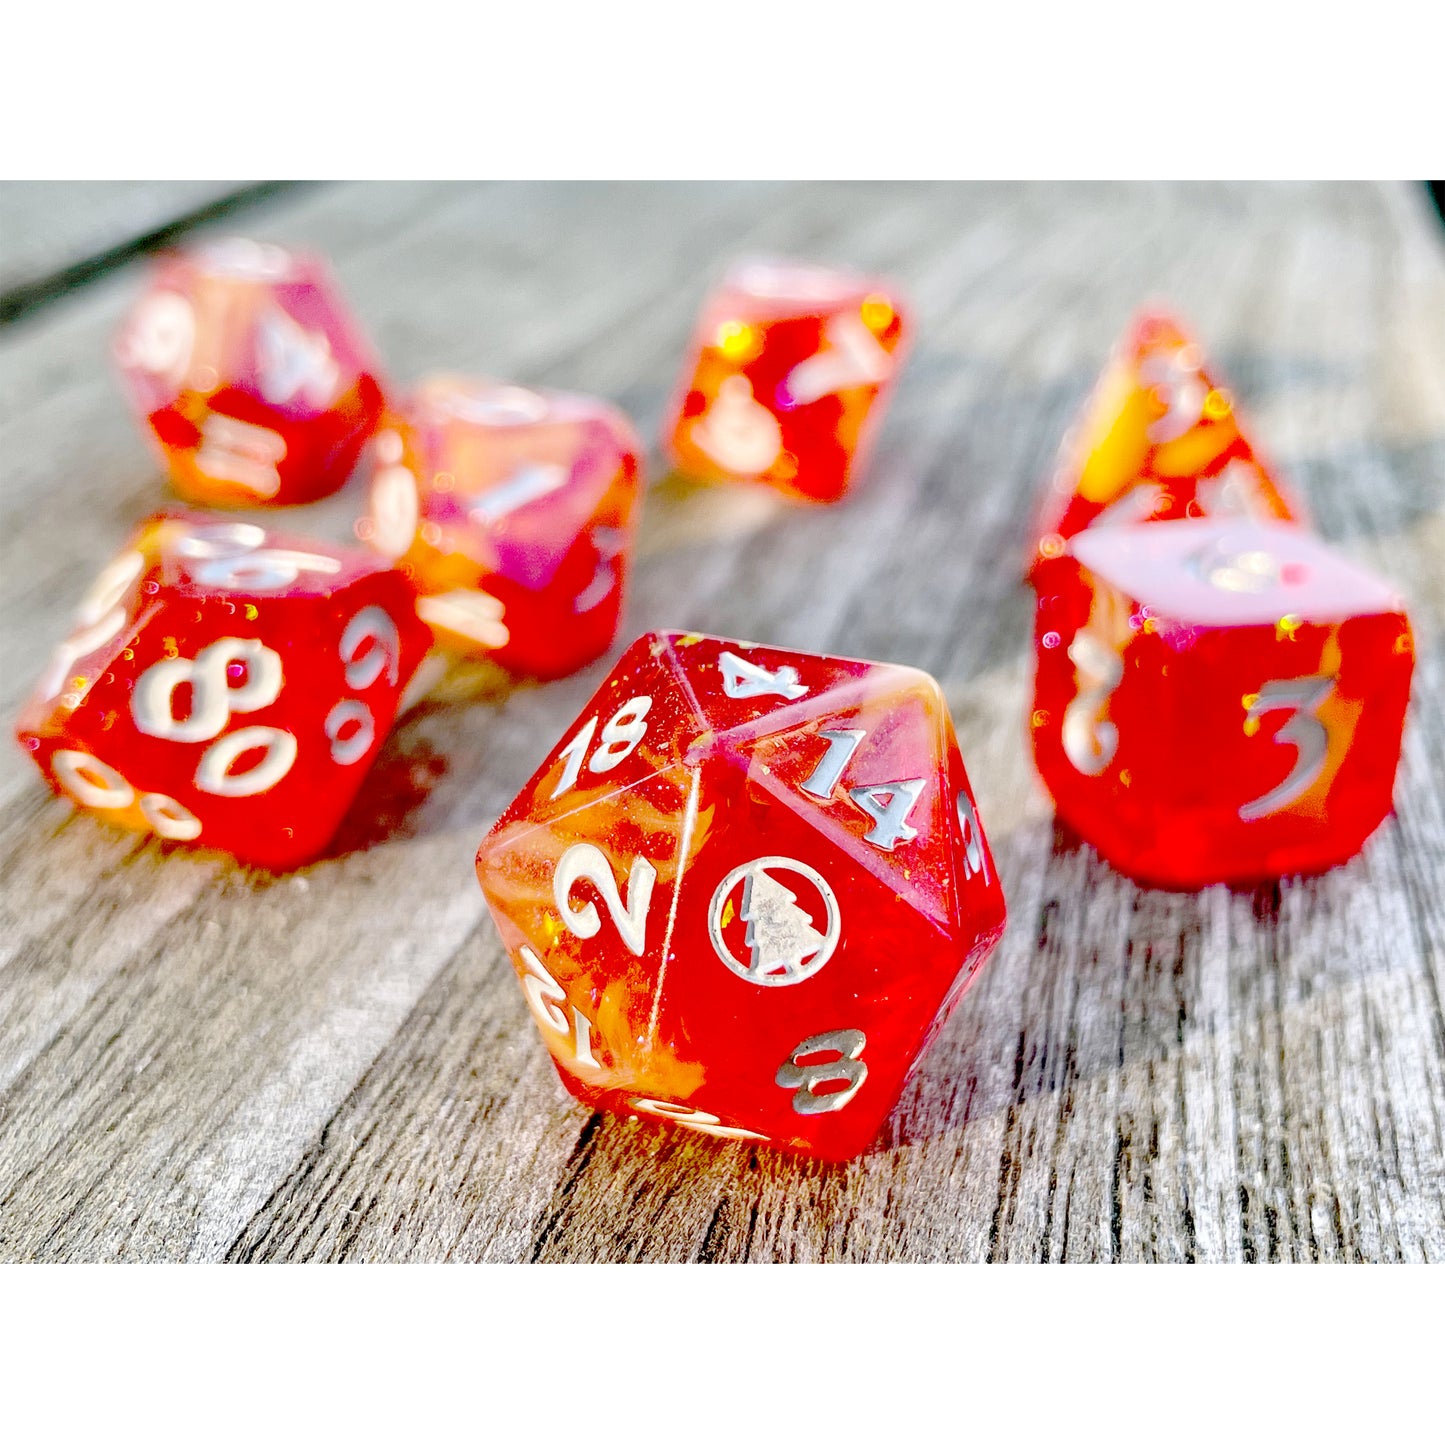 Image of an orange dice set with silver lettering. The dice have yellow veins and glitter running through the center of them. The 20 on the D20 is a silver pine tree in a circle. 